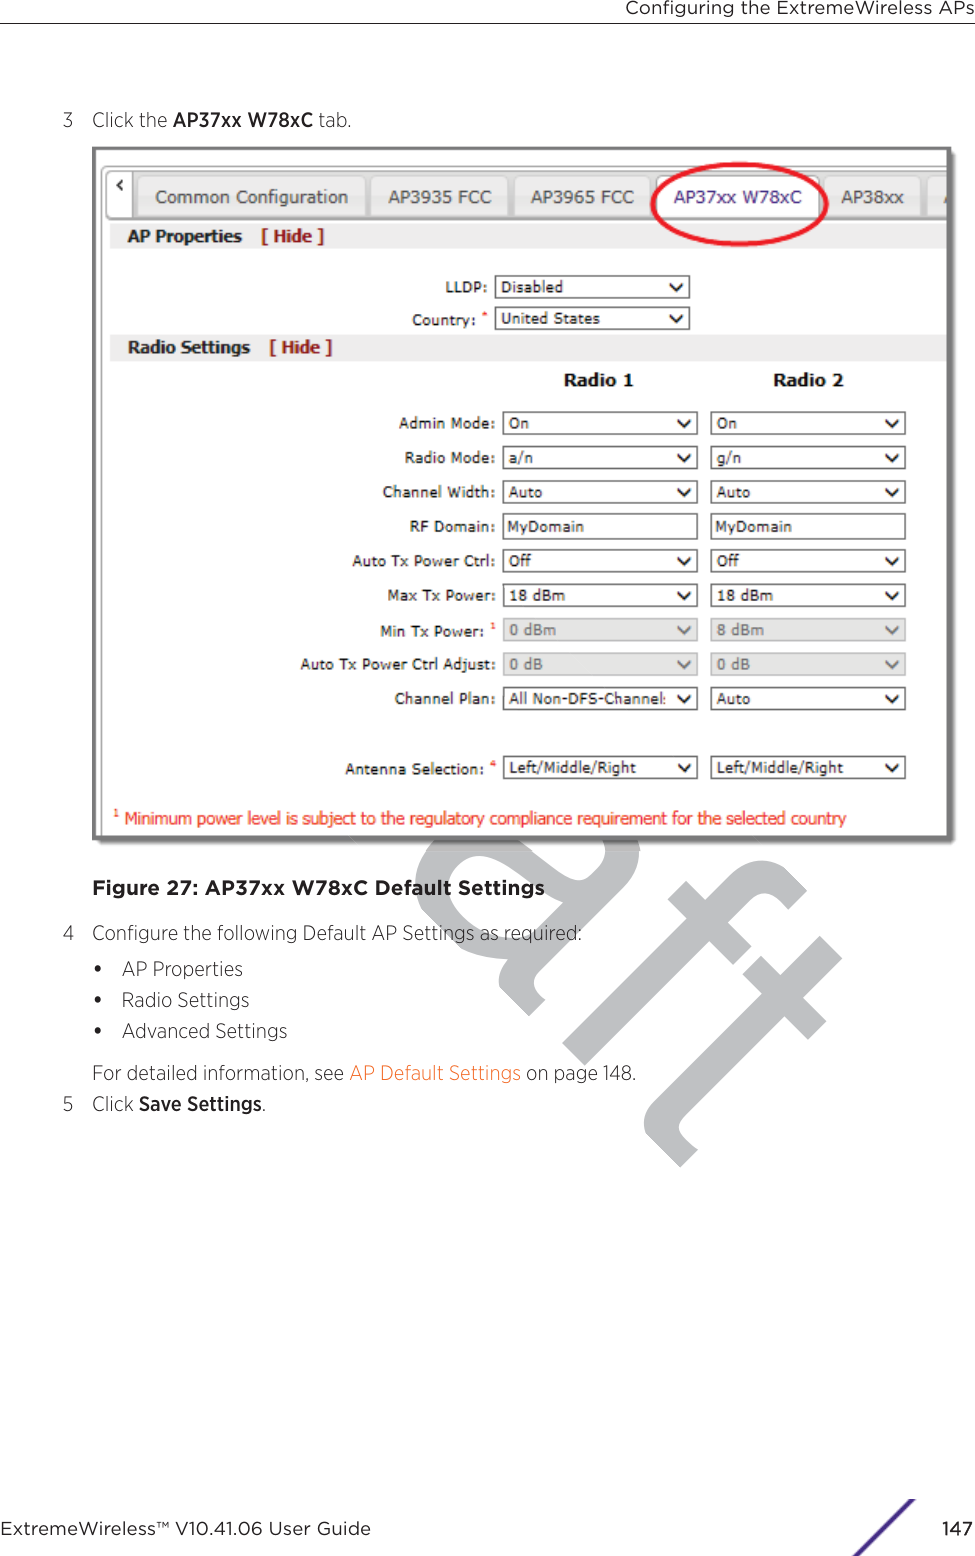 raft3 Click the AP37xx W78xC tab.Figure 27: AP37xx W78xC Default Settings4 Conﬁgure the following Default AP Settings as required:•AP Properties•Radio Settings•Advanced SettingsFor detailed information, see AP Default Settings on page 148.5 Click Save Settings.Conﬁguring the ExtremeWireless APsExtremeWireless™ V10.41.06 User Guide 1147